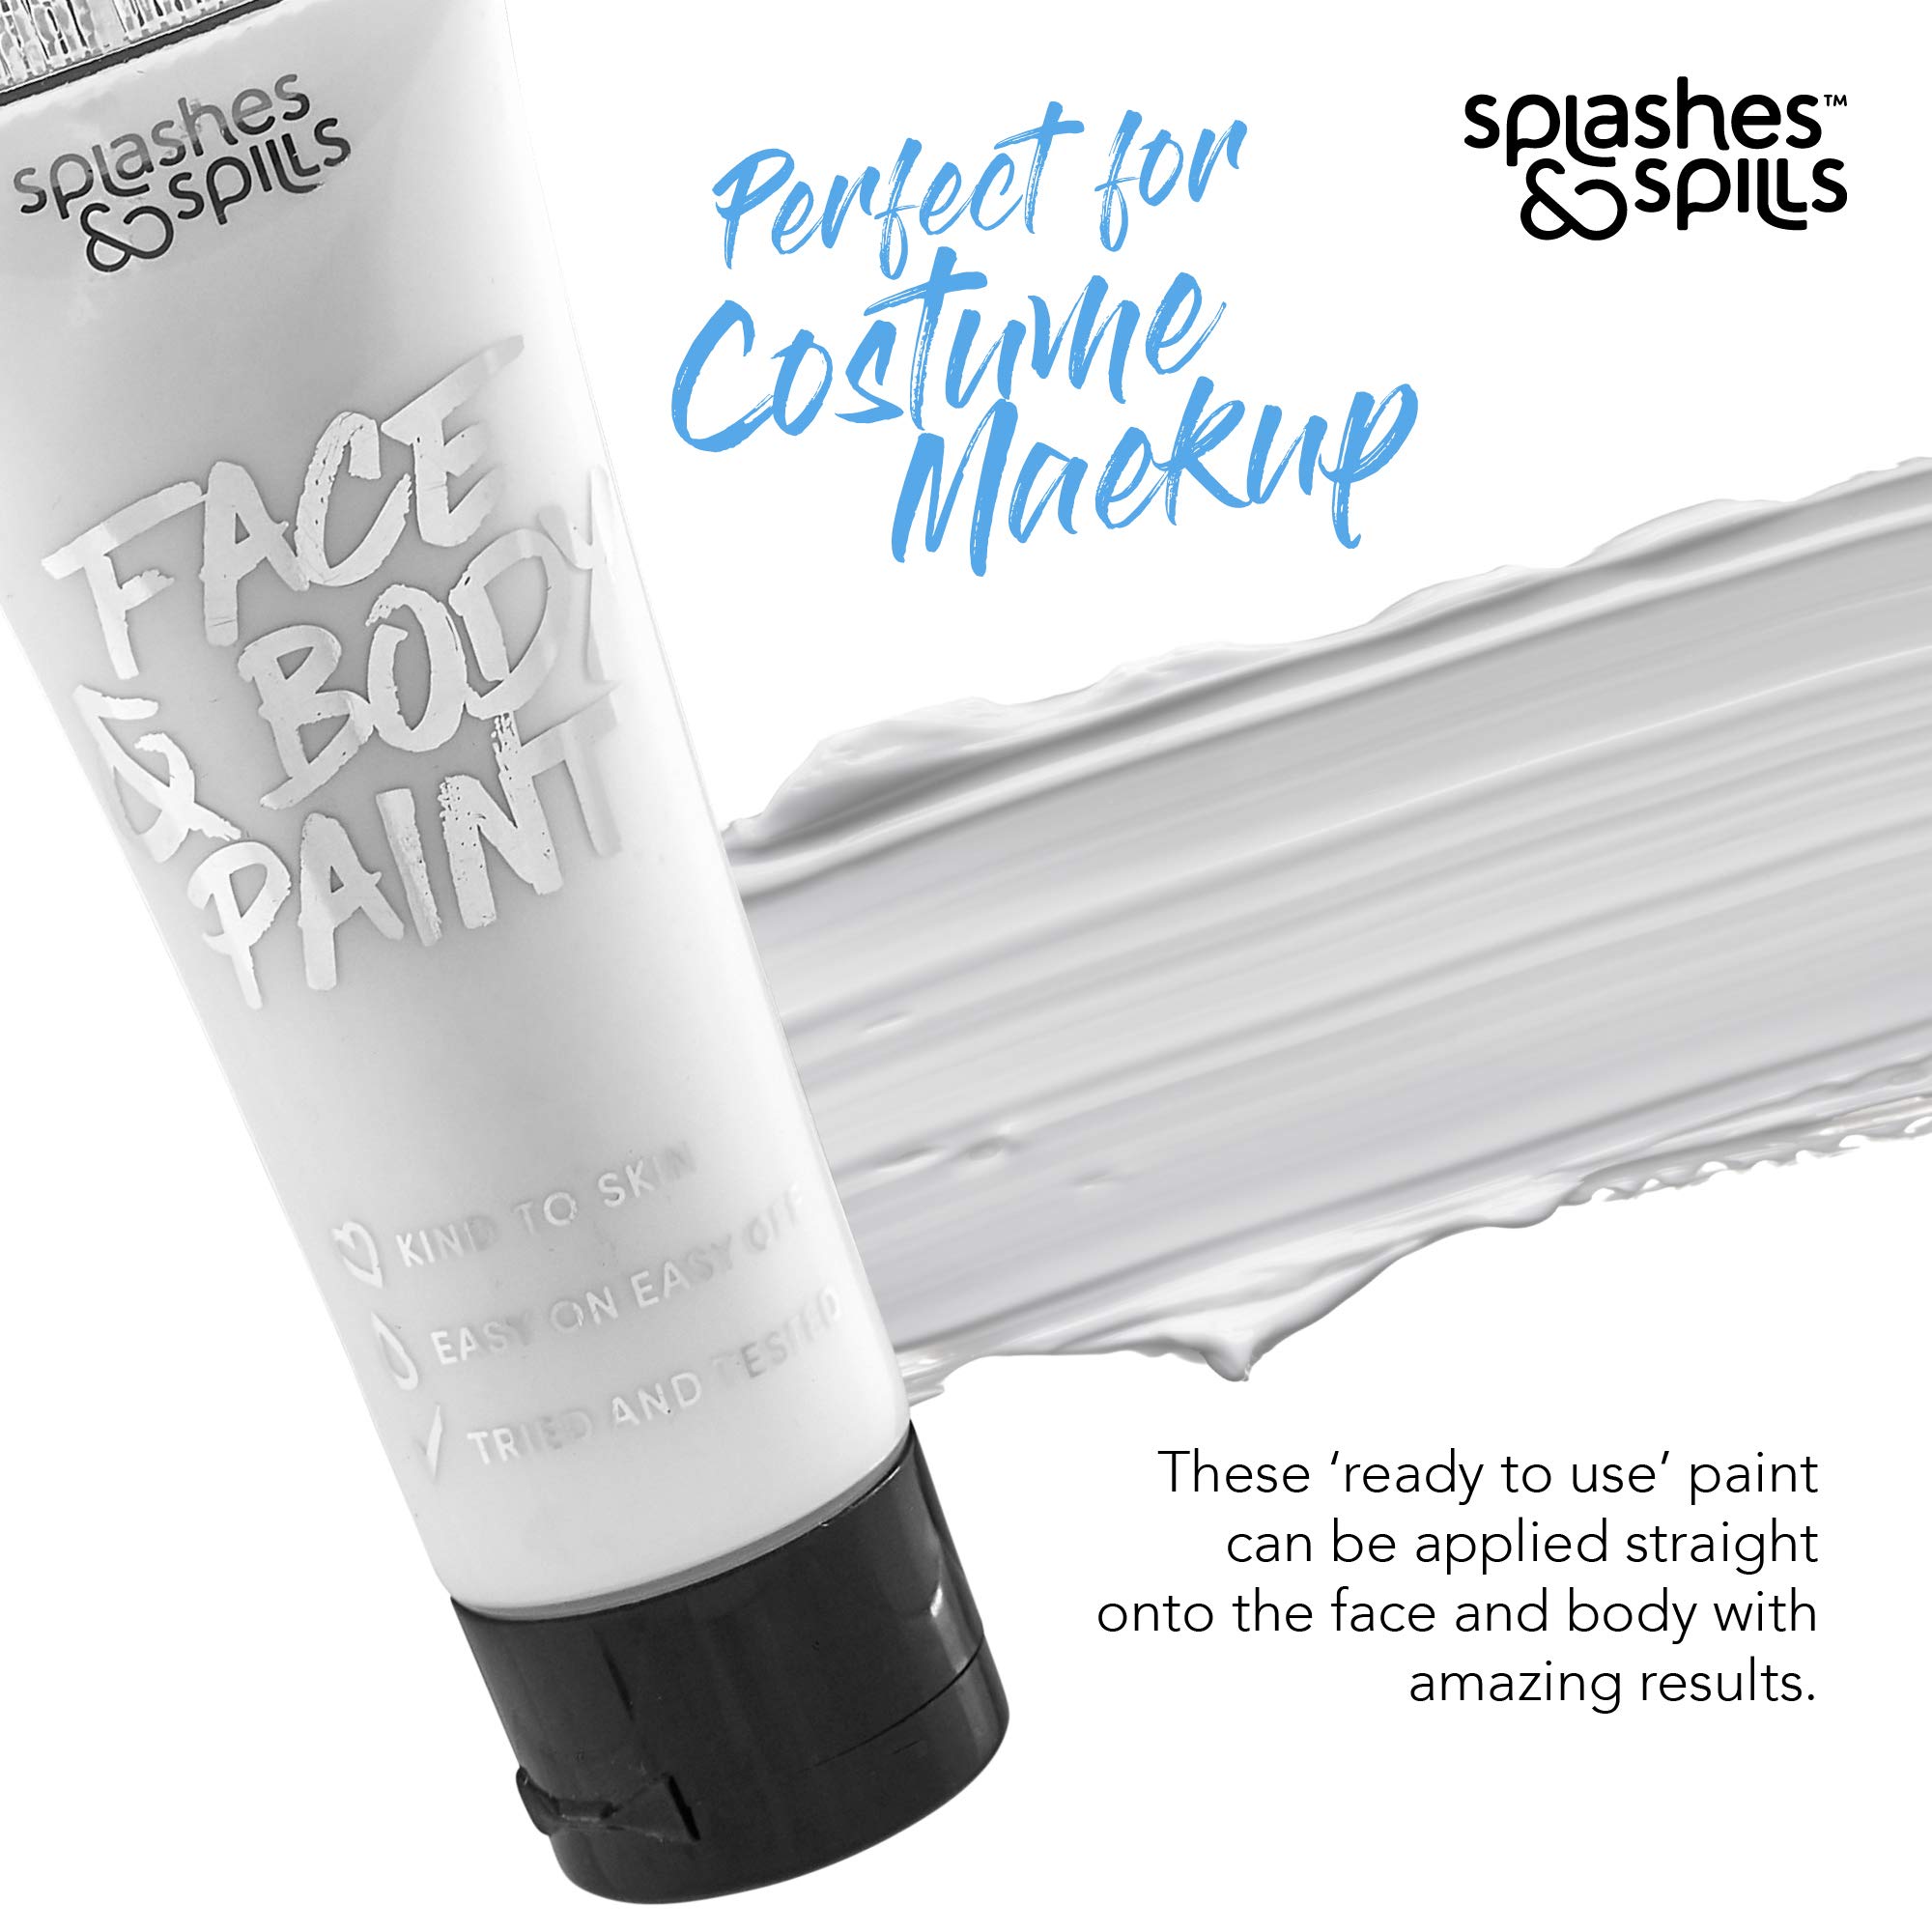 Face and Body Paint Cream - White, 30ml - Pretend Costume and Dress Up Makeup by Splashes & Spills